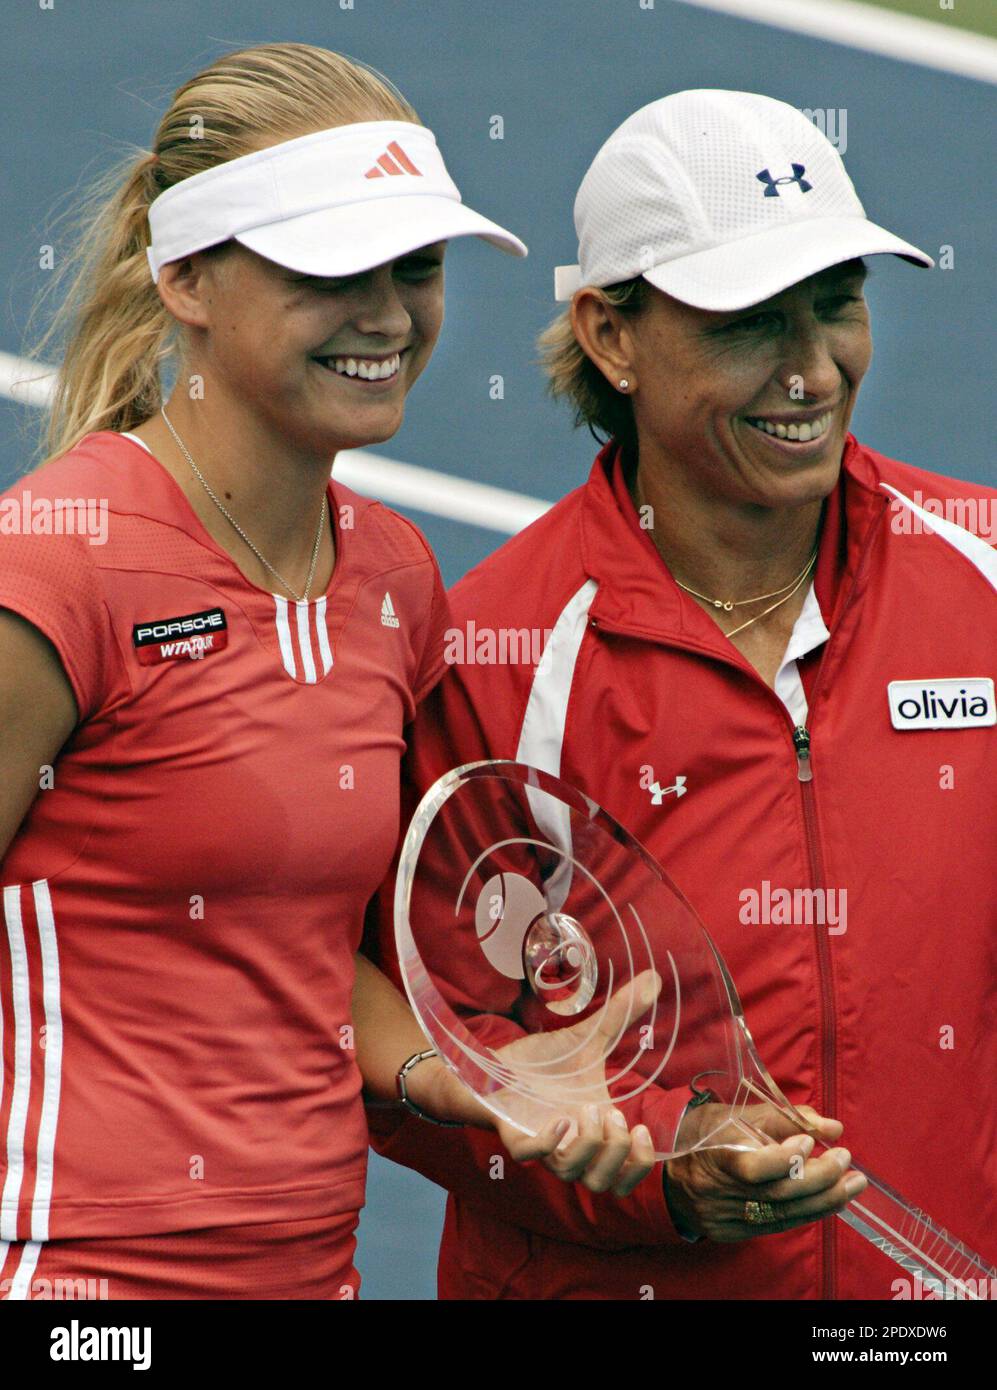 Anna-Lena Groenefeld, left, of Germany, and Martina Navratilova, right, of  the USA, pose with the trophy after they defeated Conchita Martinez and  Virginia Ruano Pascual, of Spain, in the doubles final at